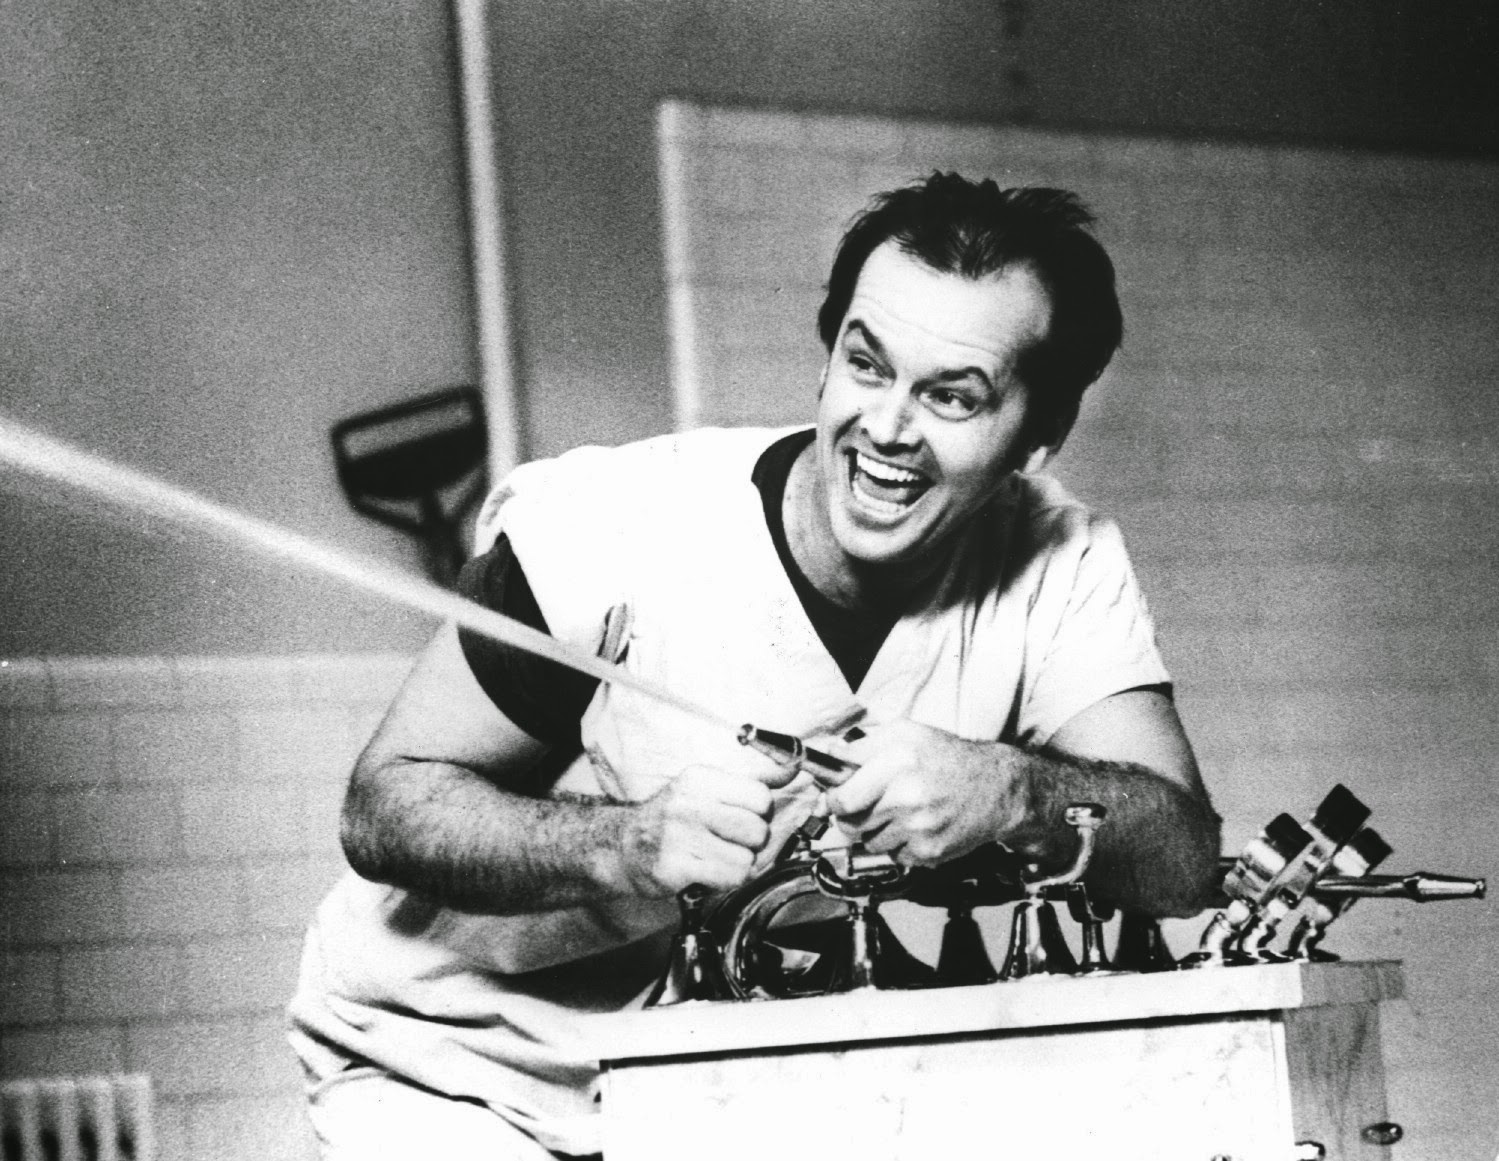 Rare Backstage Photos From “One Flew Over the Cuckoo’s Nest” « Art-Sheep1499 x 1161